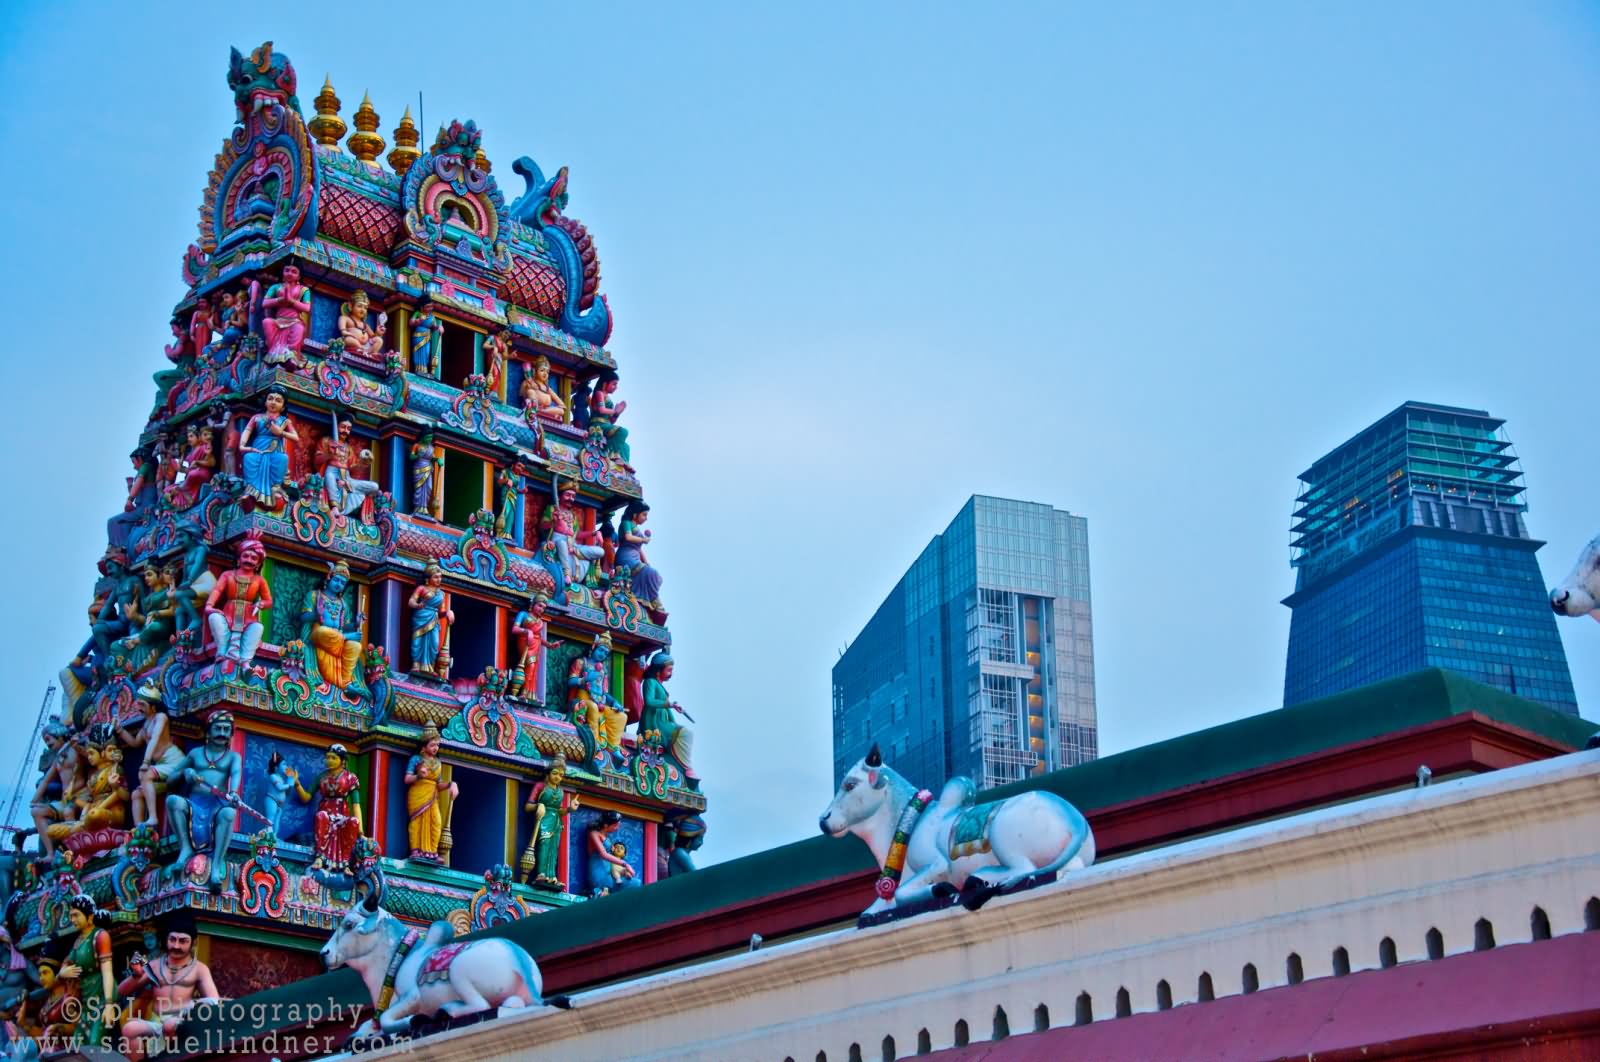 Side View Of Sri Mariamman Temple, Singapore